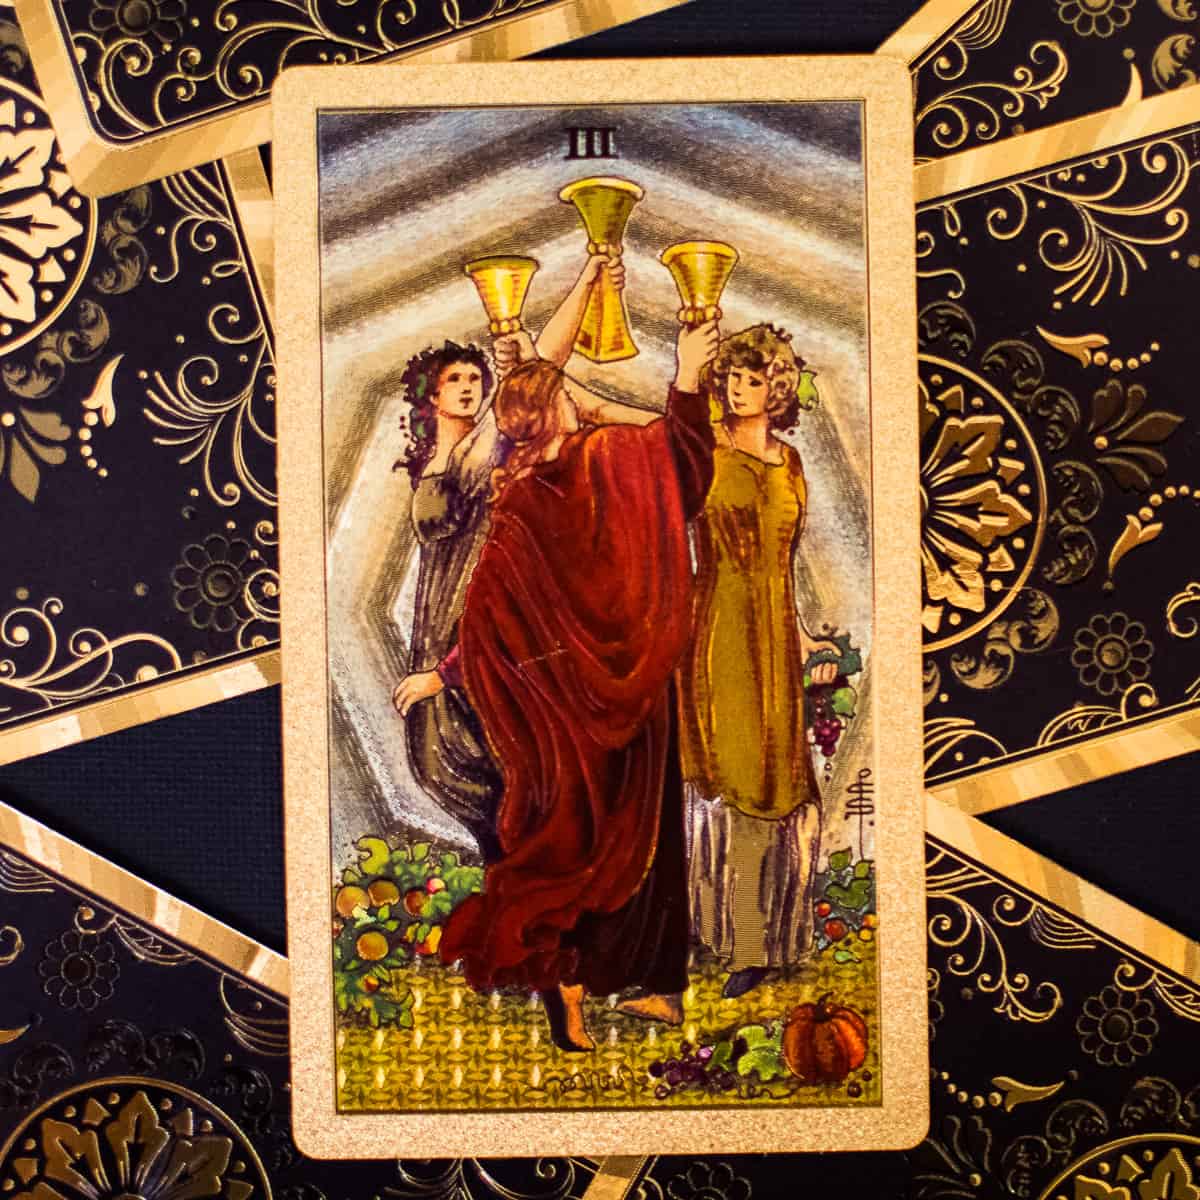 Three women celebrating with 3 gold cups depicted on a tarot card.